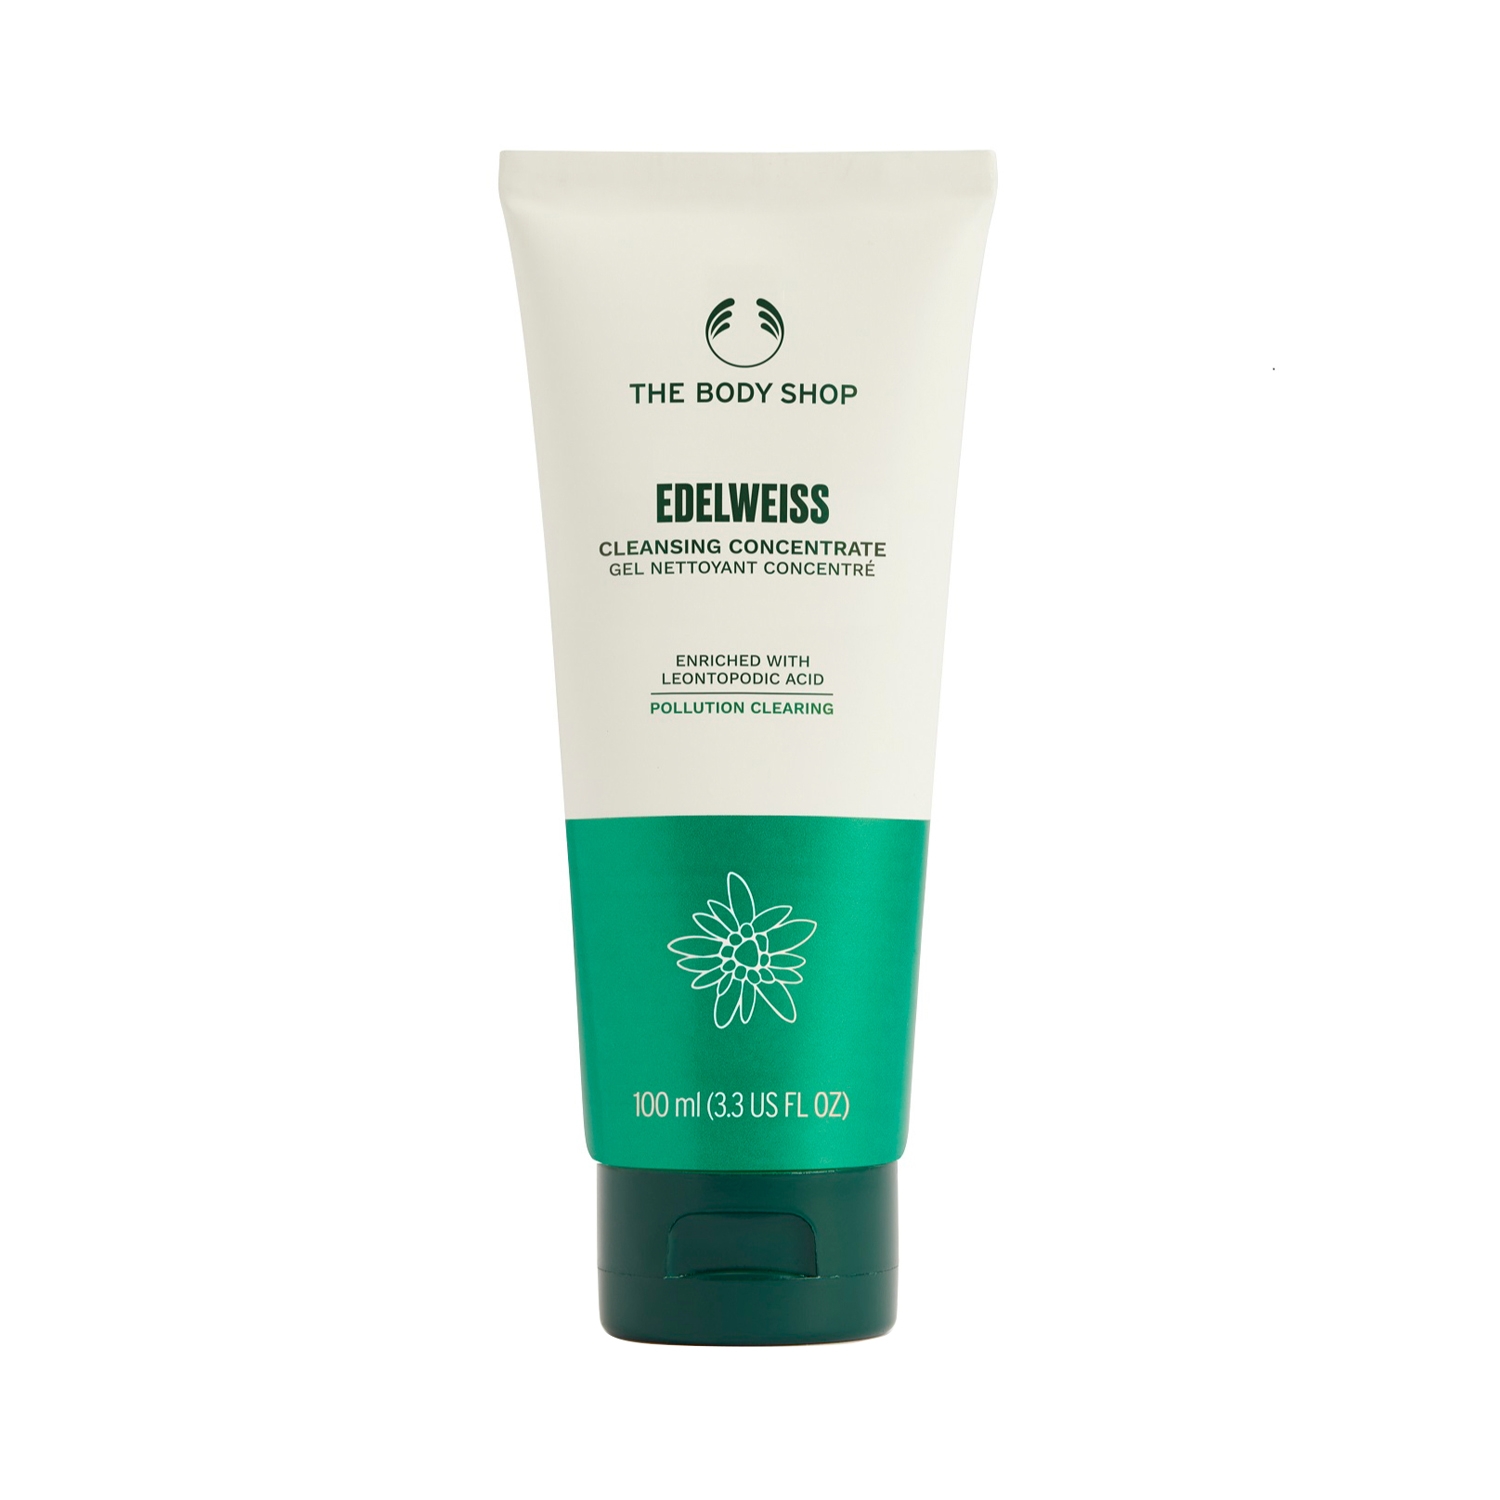 The Body Shop | The Body Shop Edelweiss Cleansing Concentrate (100ml)